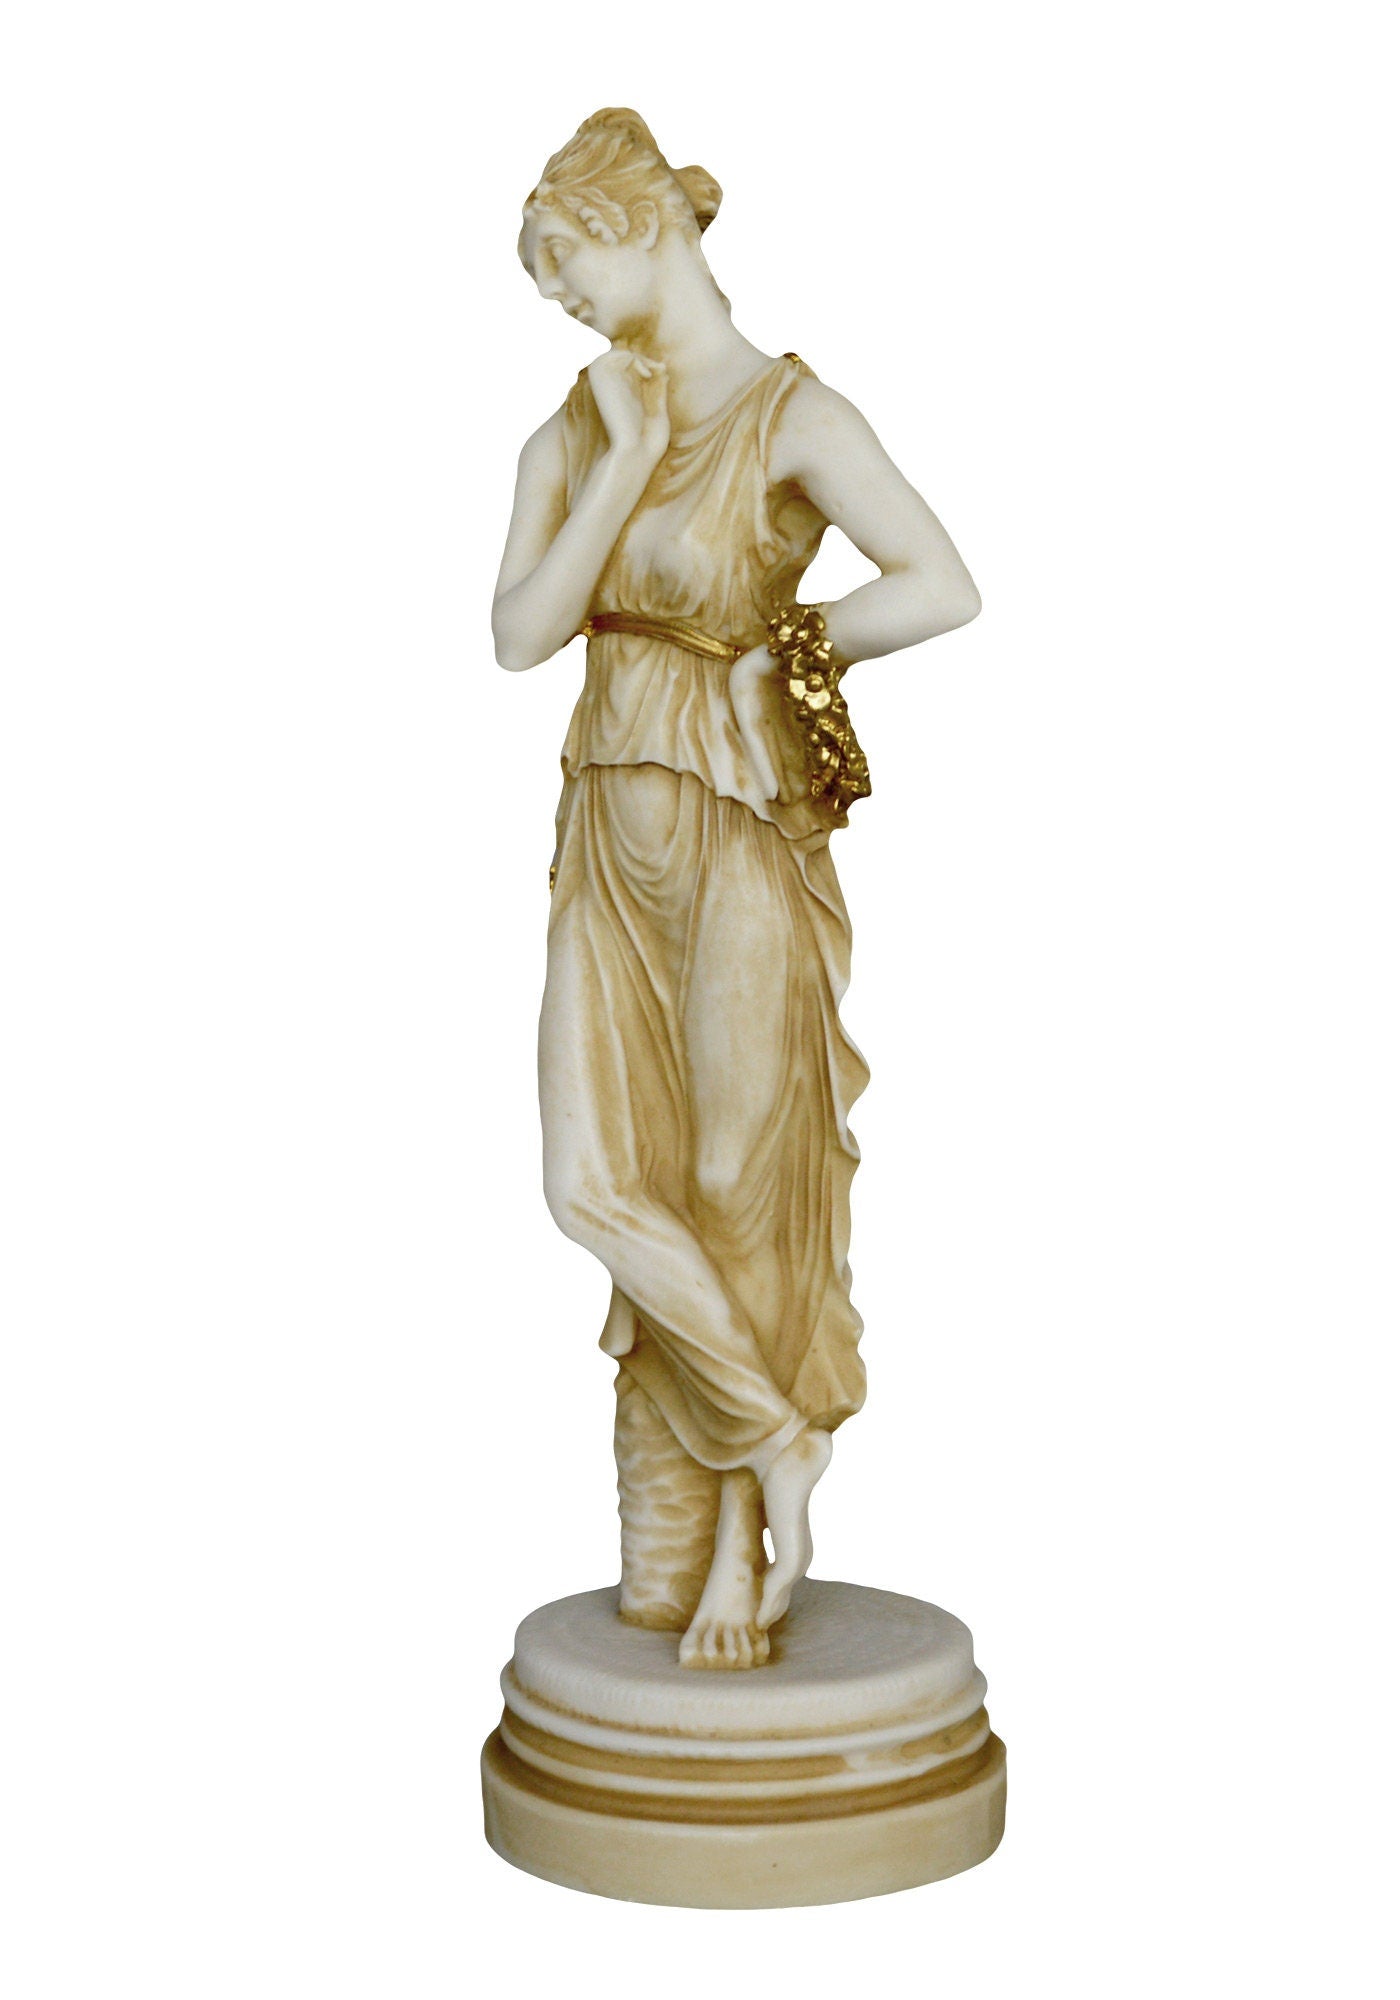 Persephone - Dual Deity - Daughter of Demeter and Zeus - Wife of Hades and the Queen of the Underworld - Alabaster Aged Statue Sculpture